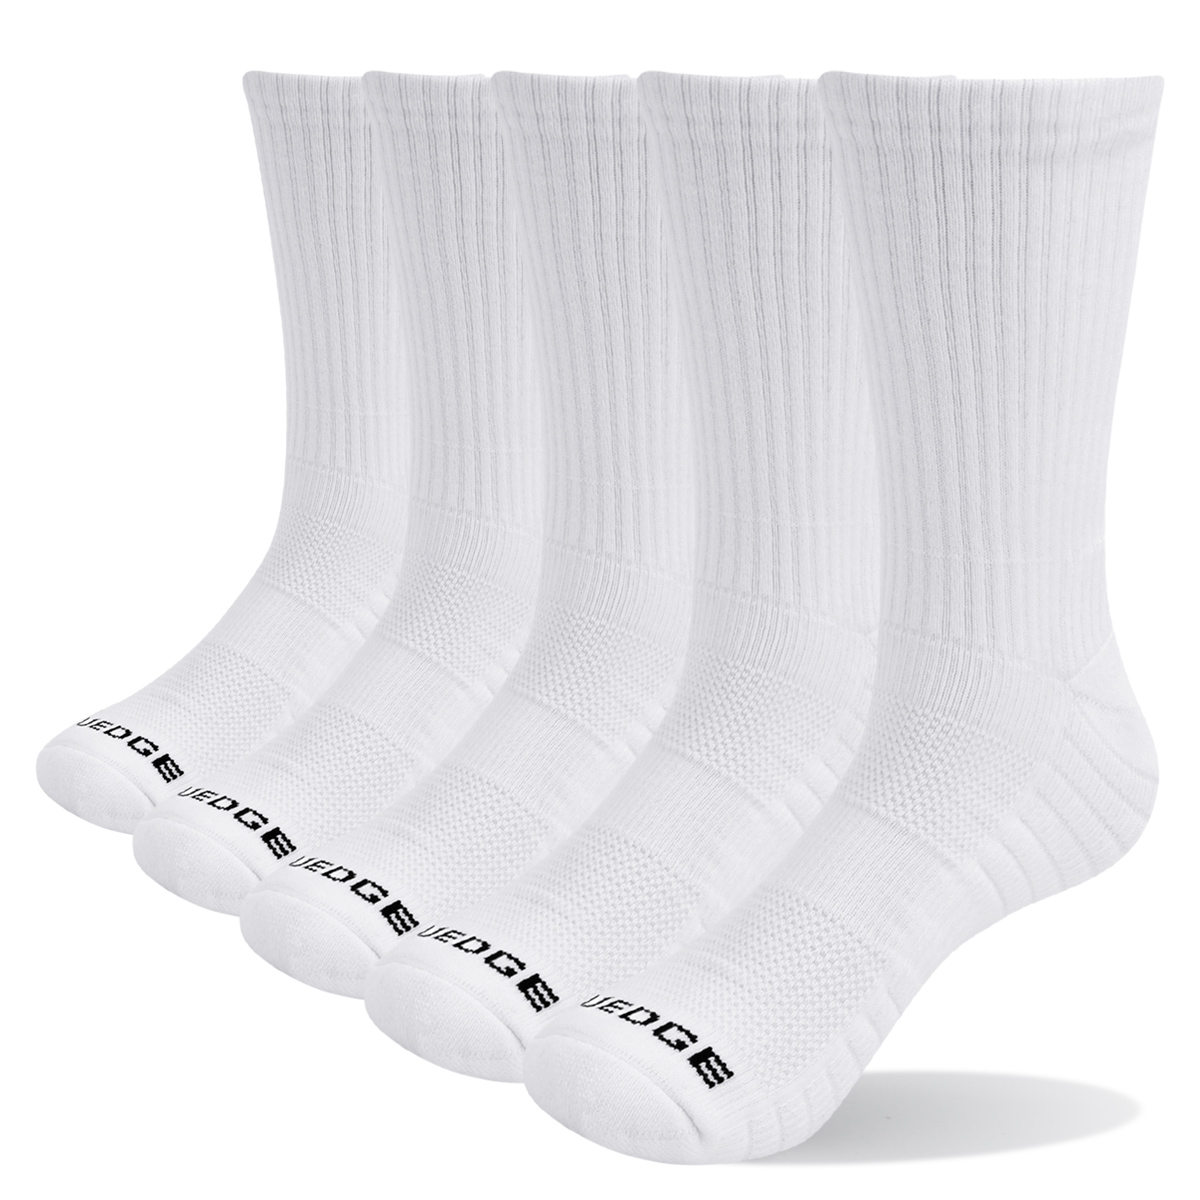 5PW1901 Breathable Cushion Combed Cotton Crew Socks(5 Pairs /Packs)